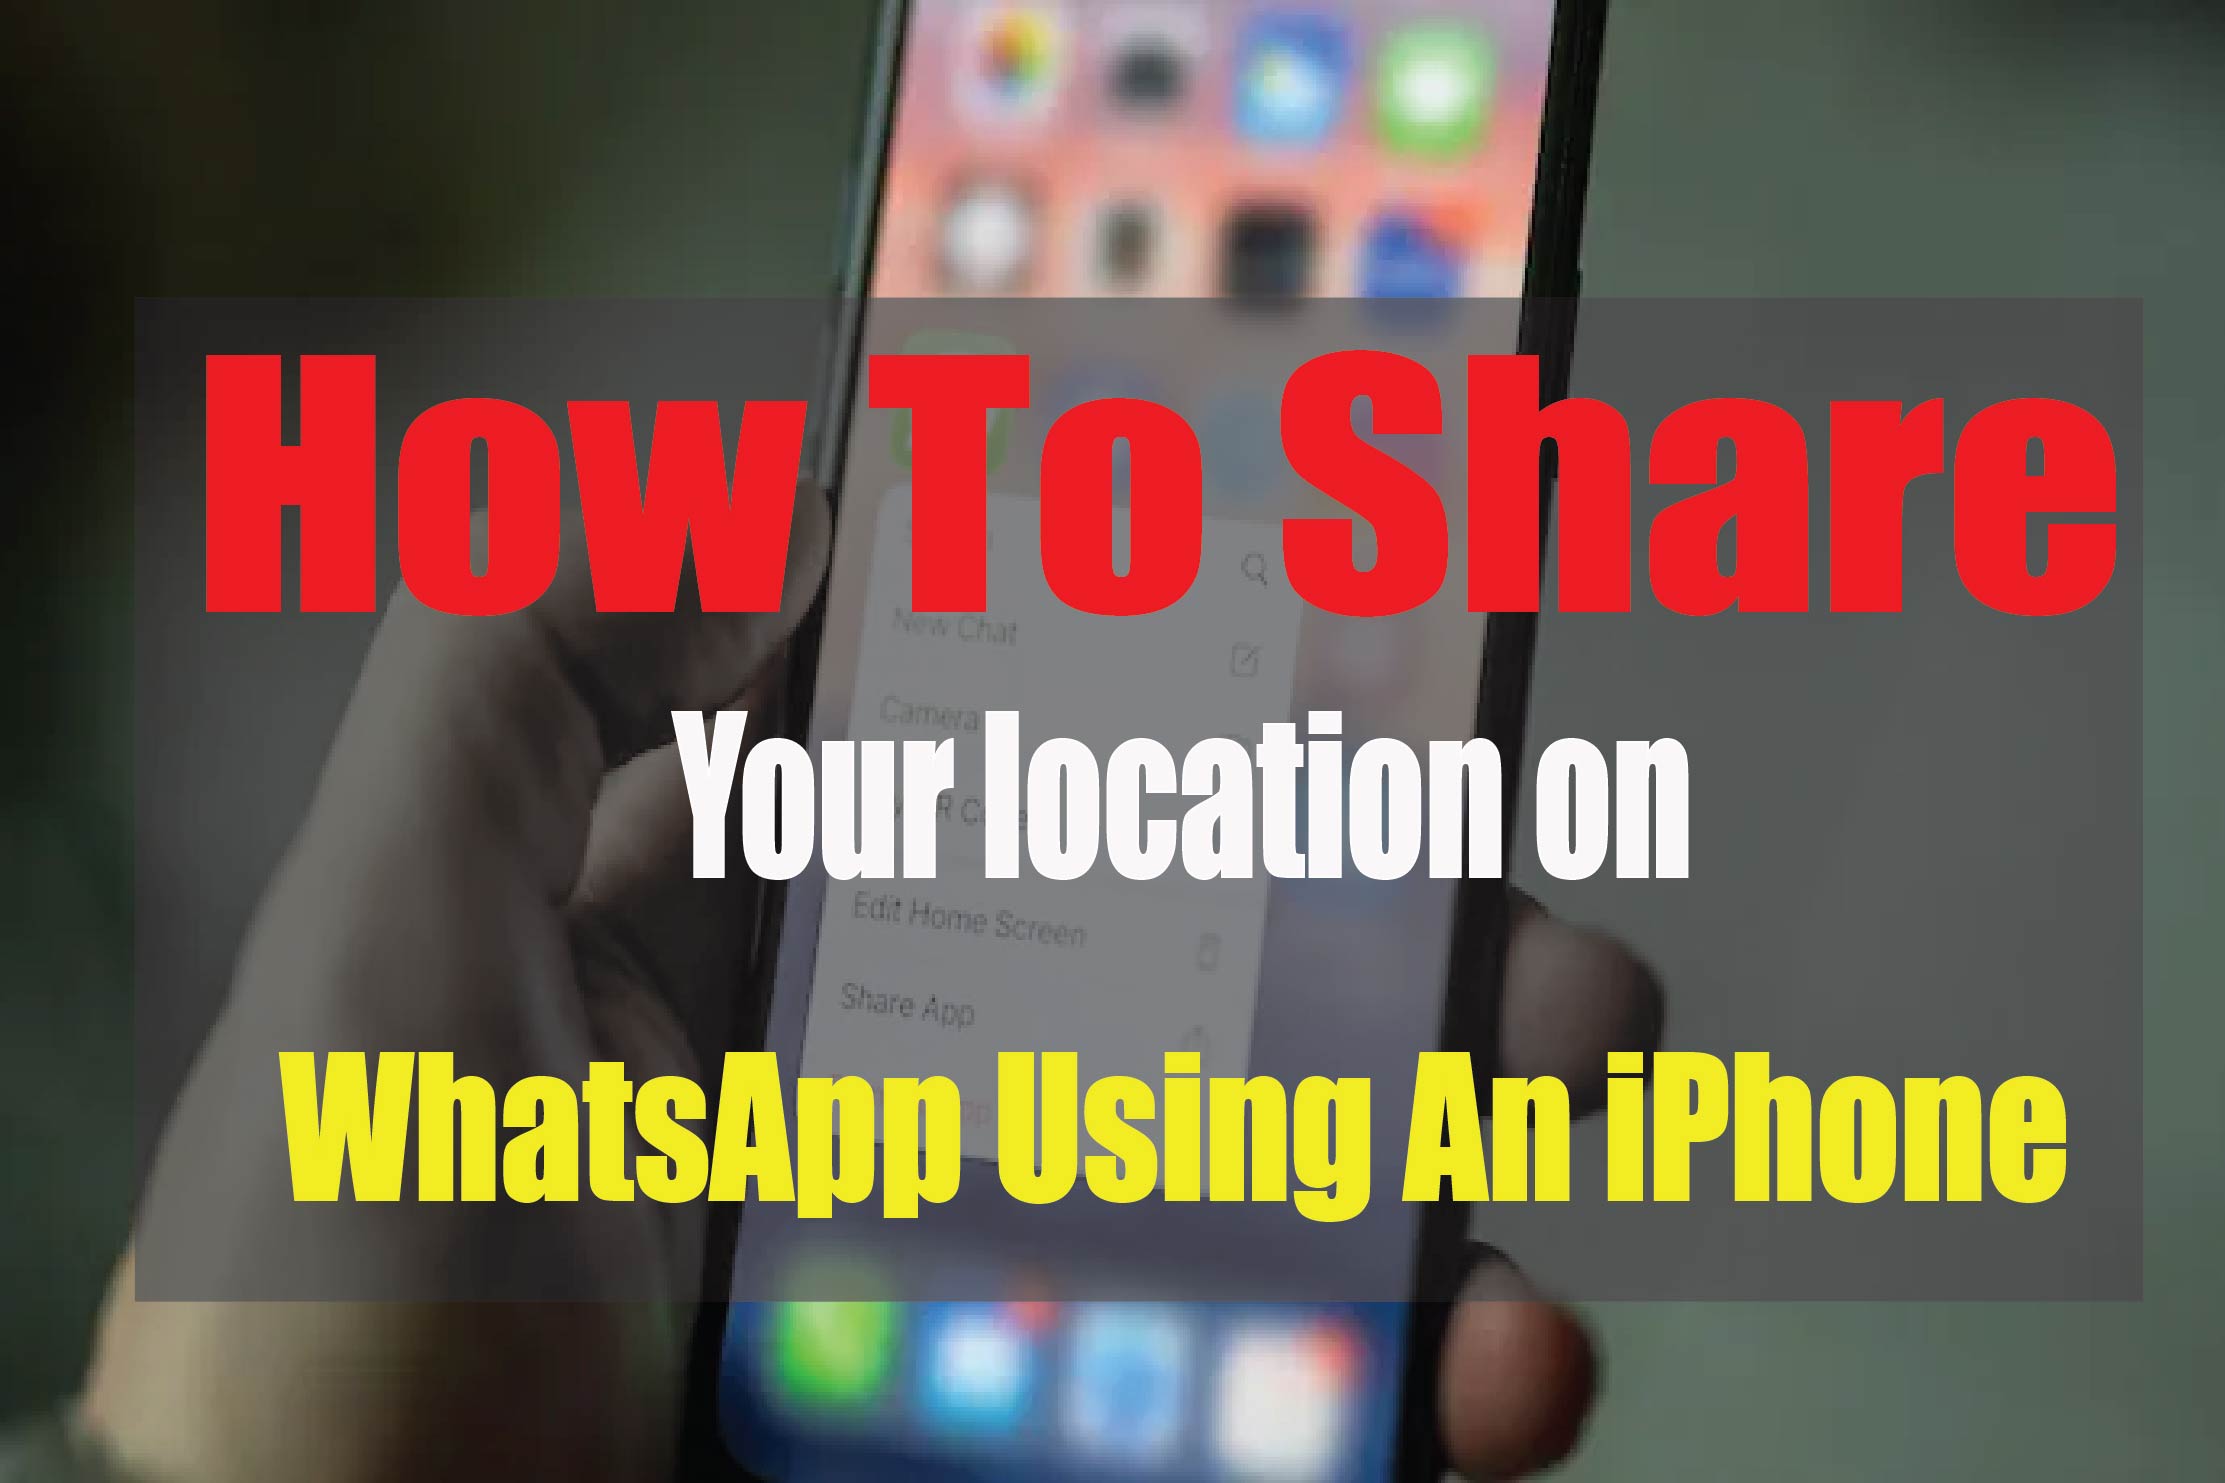 share your location on WhatsApp using an iPhone